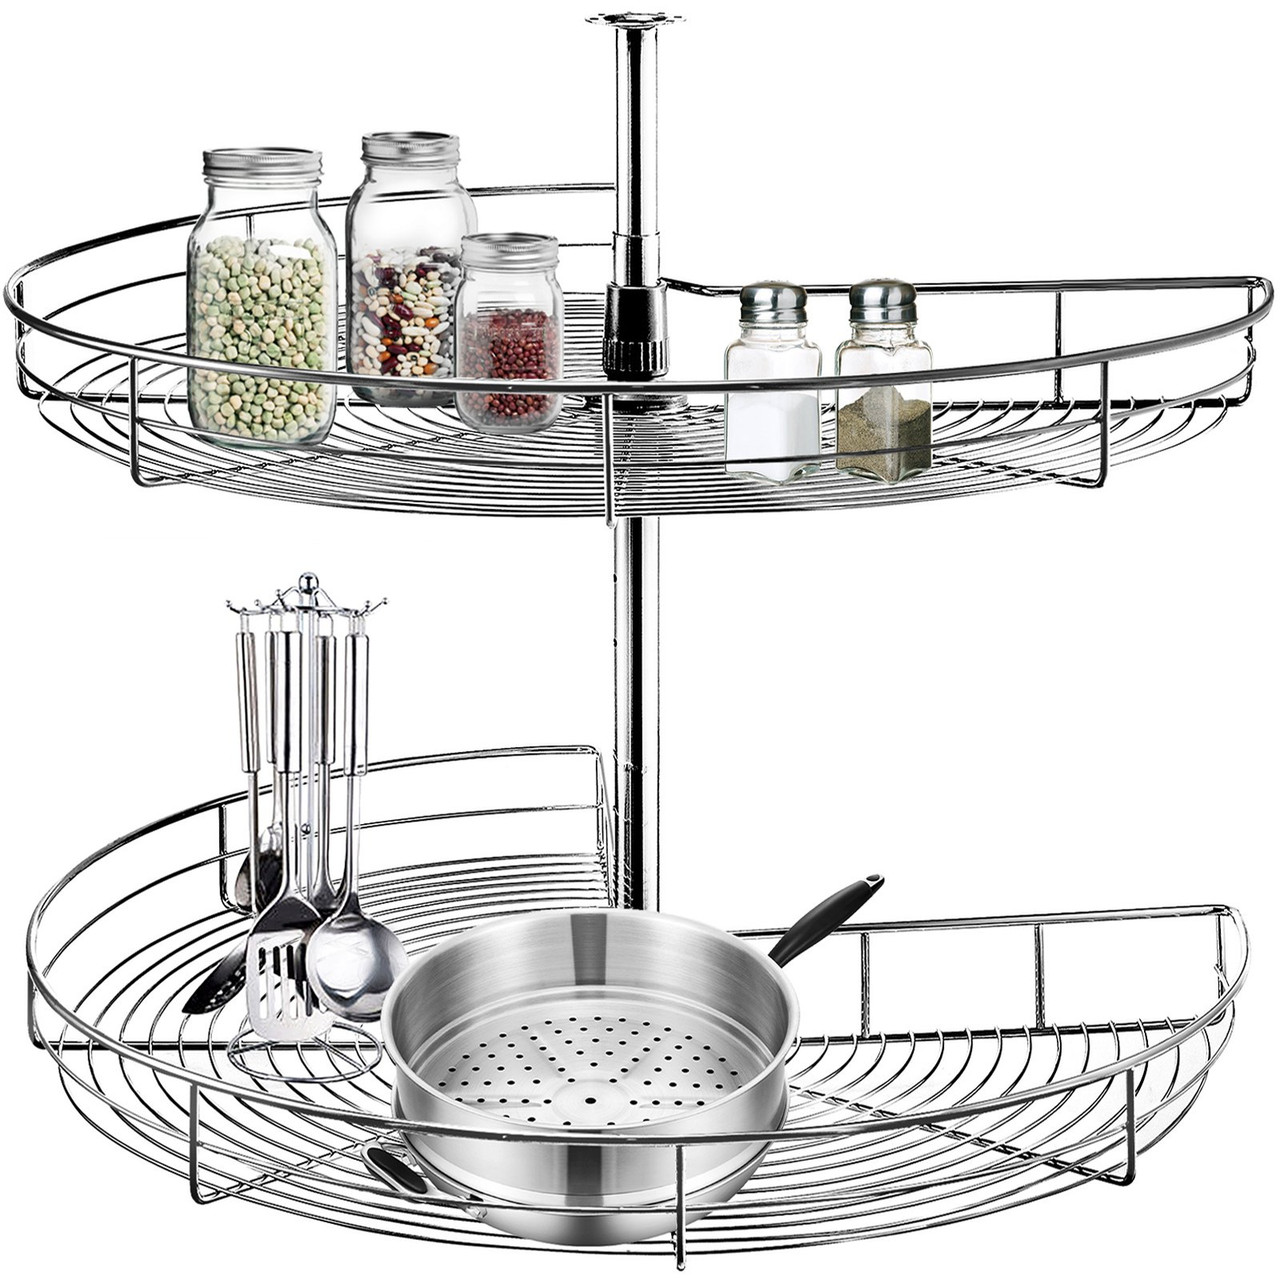 Organize It All Deluxe 3 Tier Can Storage Rack in Chrome 